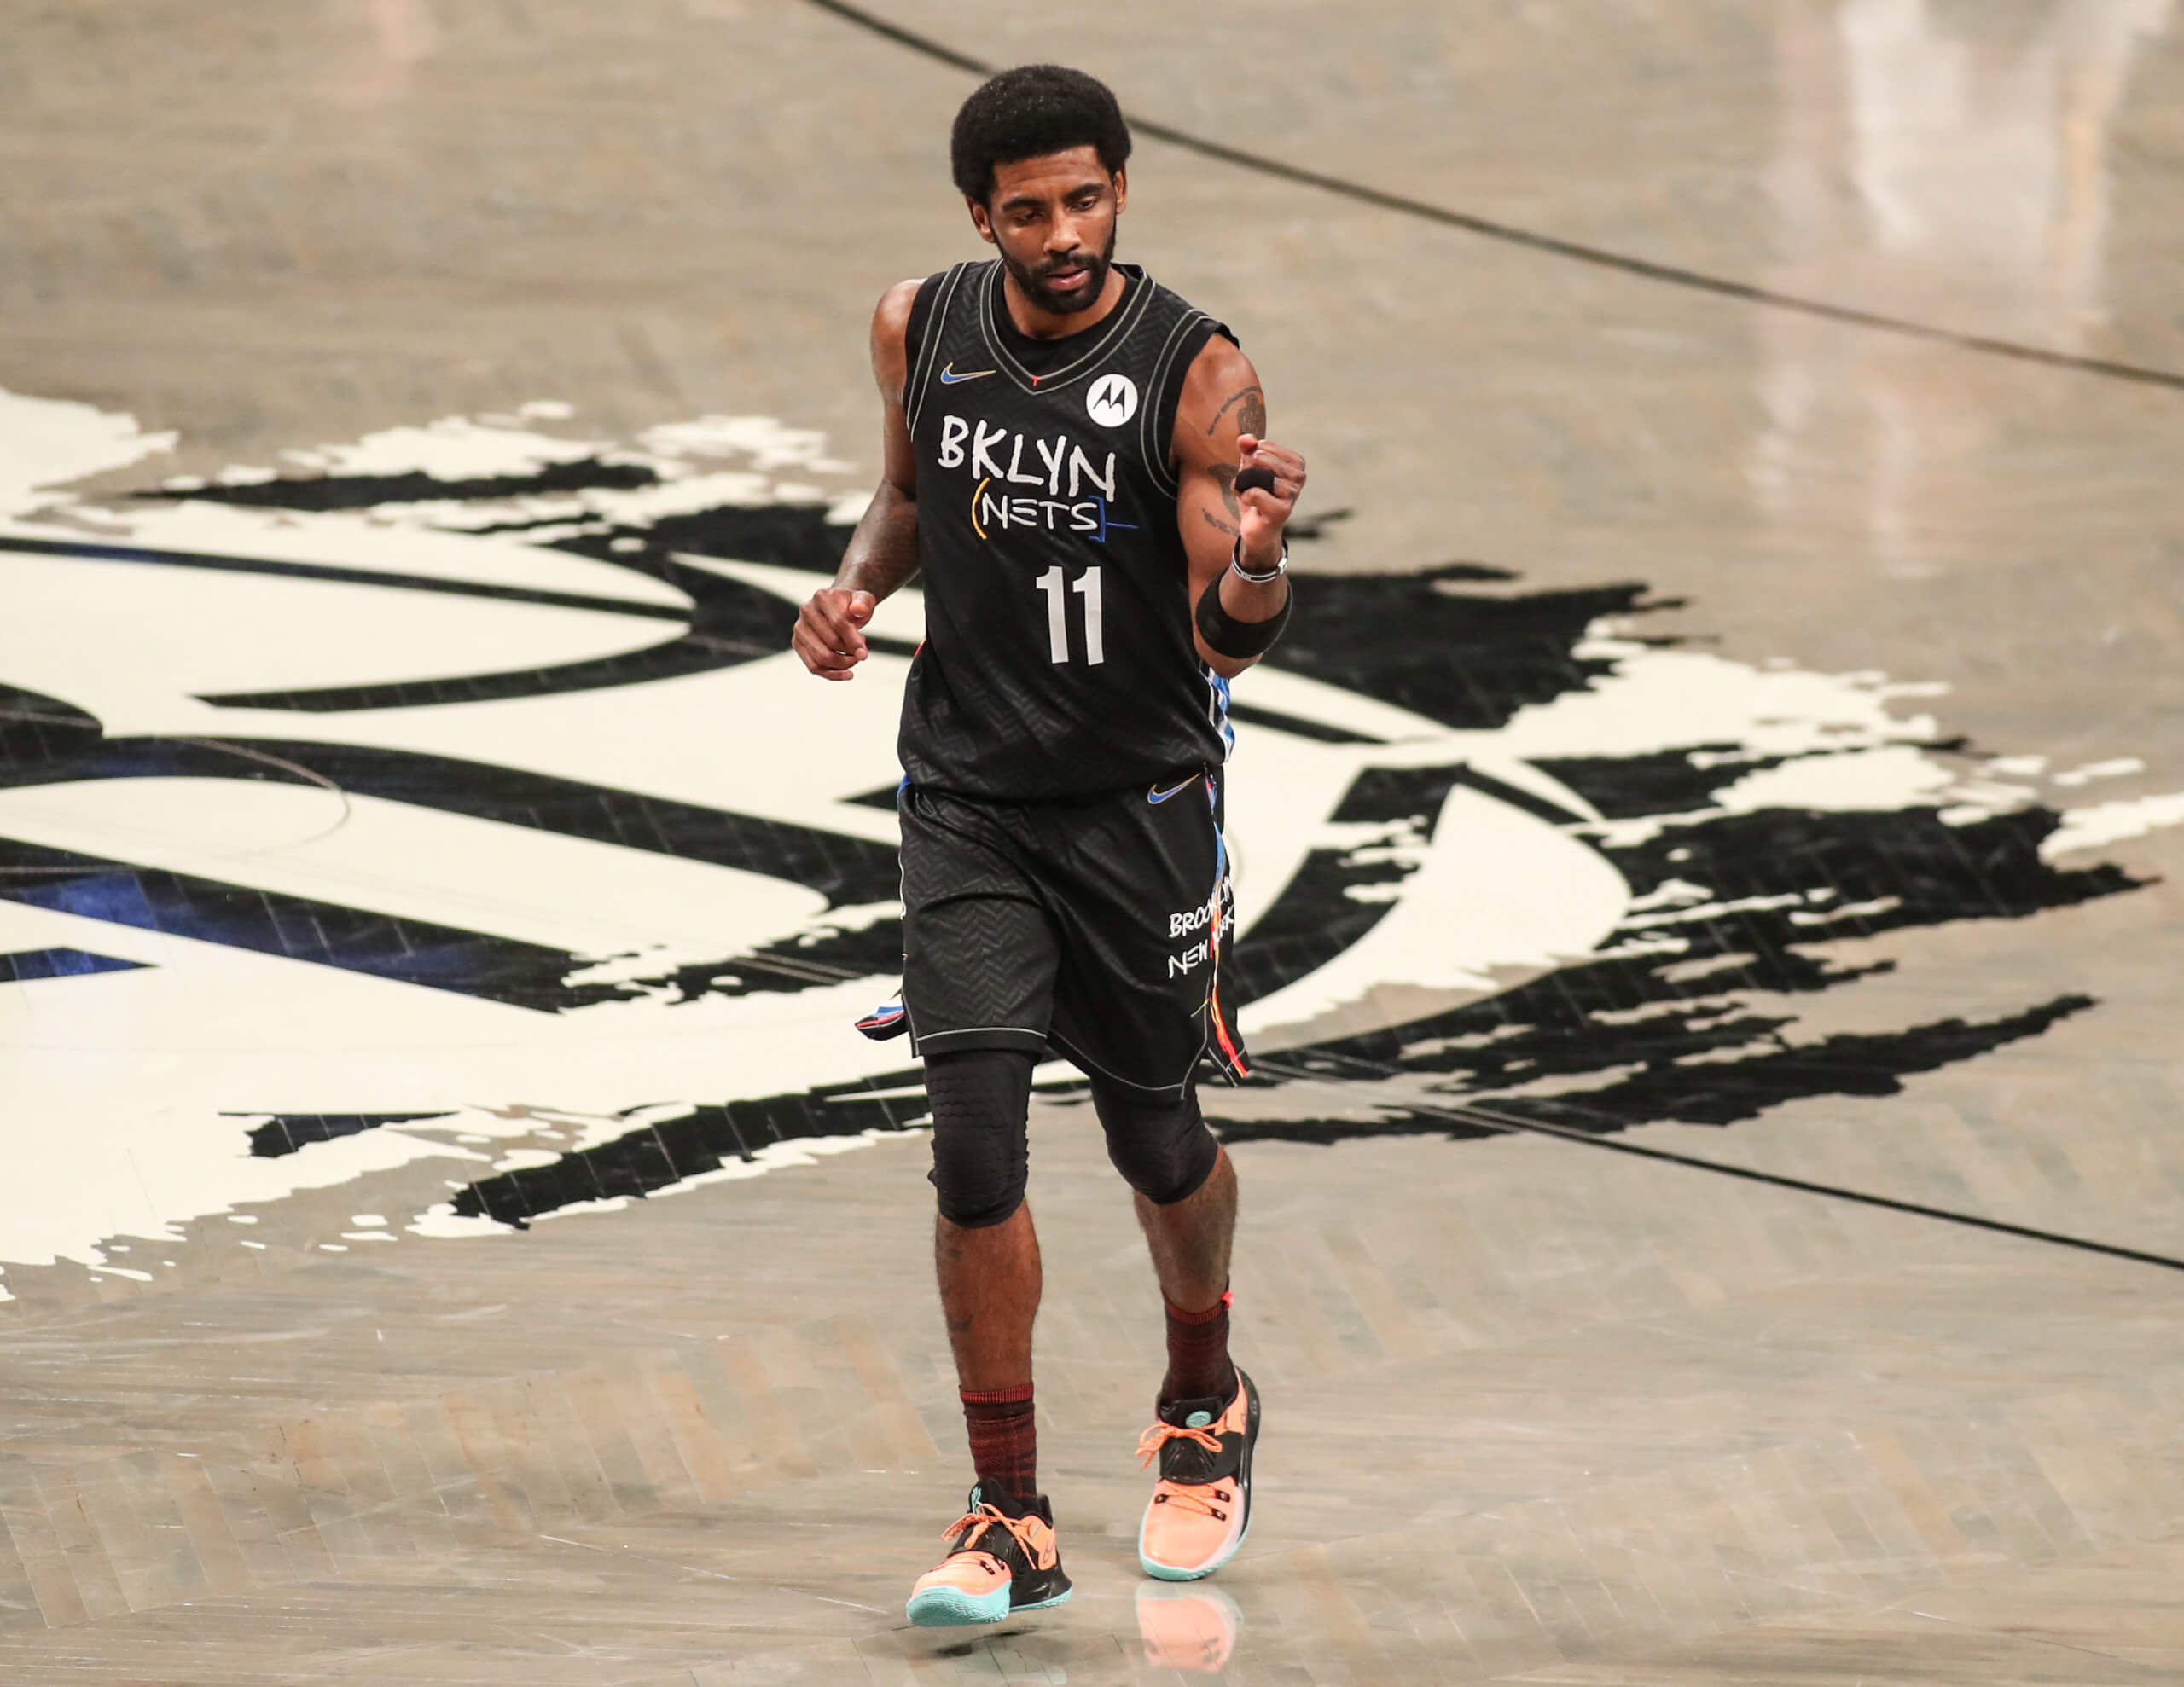 Kyrie Irving 2021 All Star Game Jersey